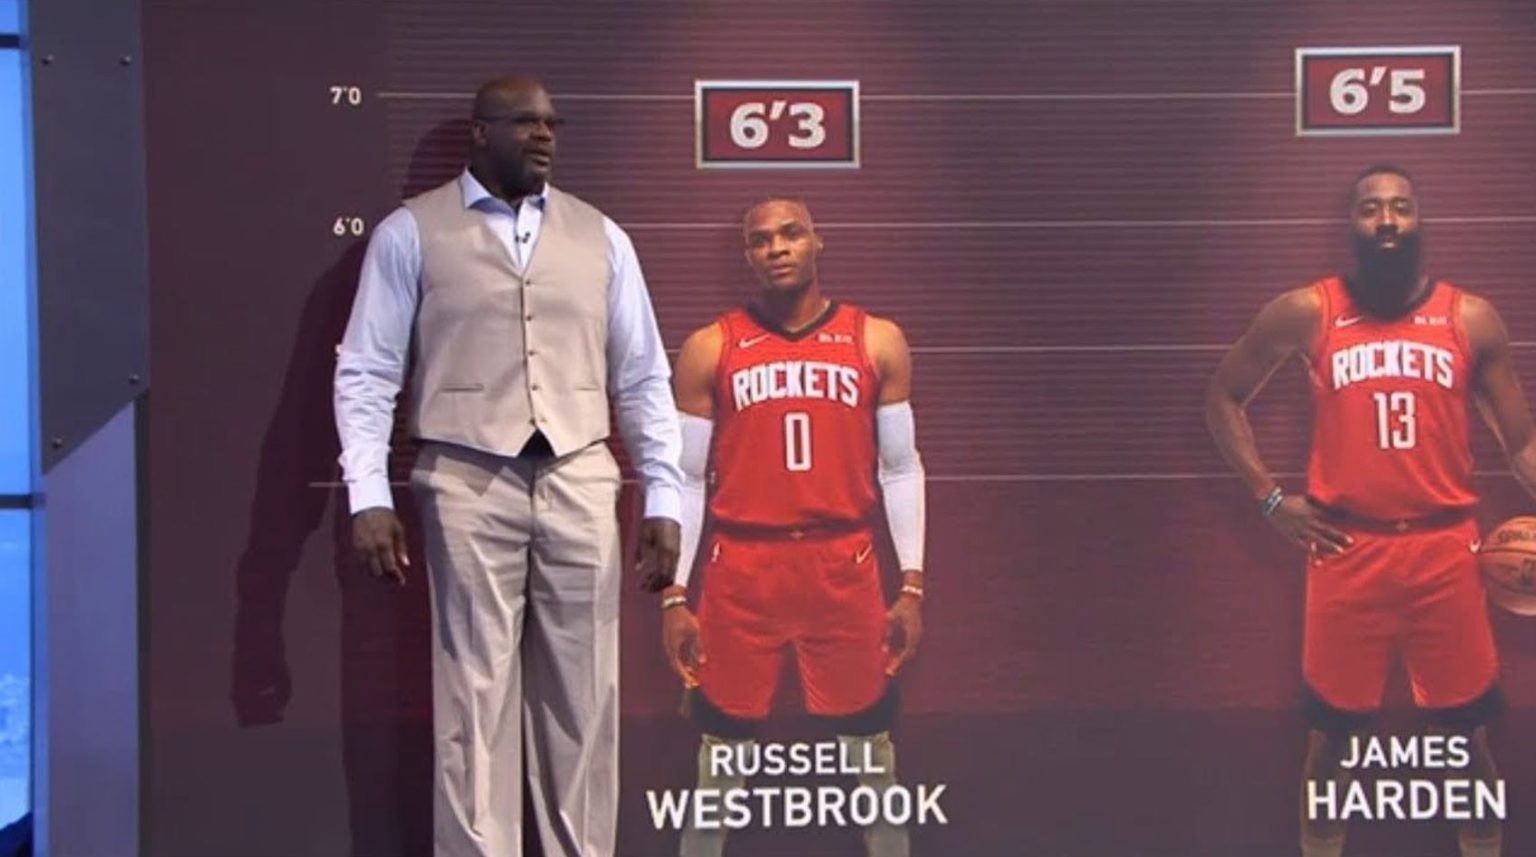 Shaqs Real Height Compared To The Tallest Professional Basketball Players In NBA Via Essentially Sports. 1536x857 